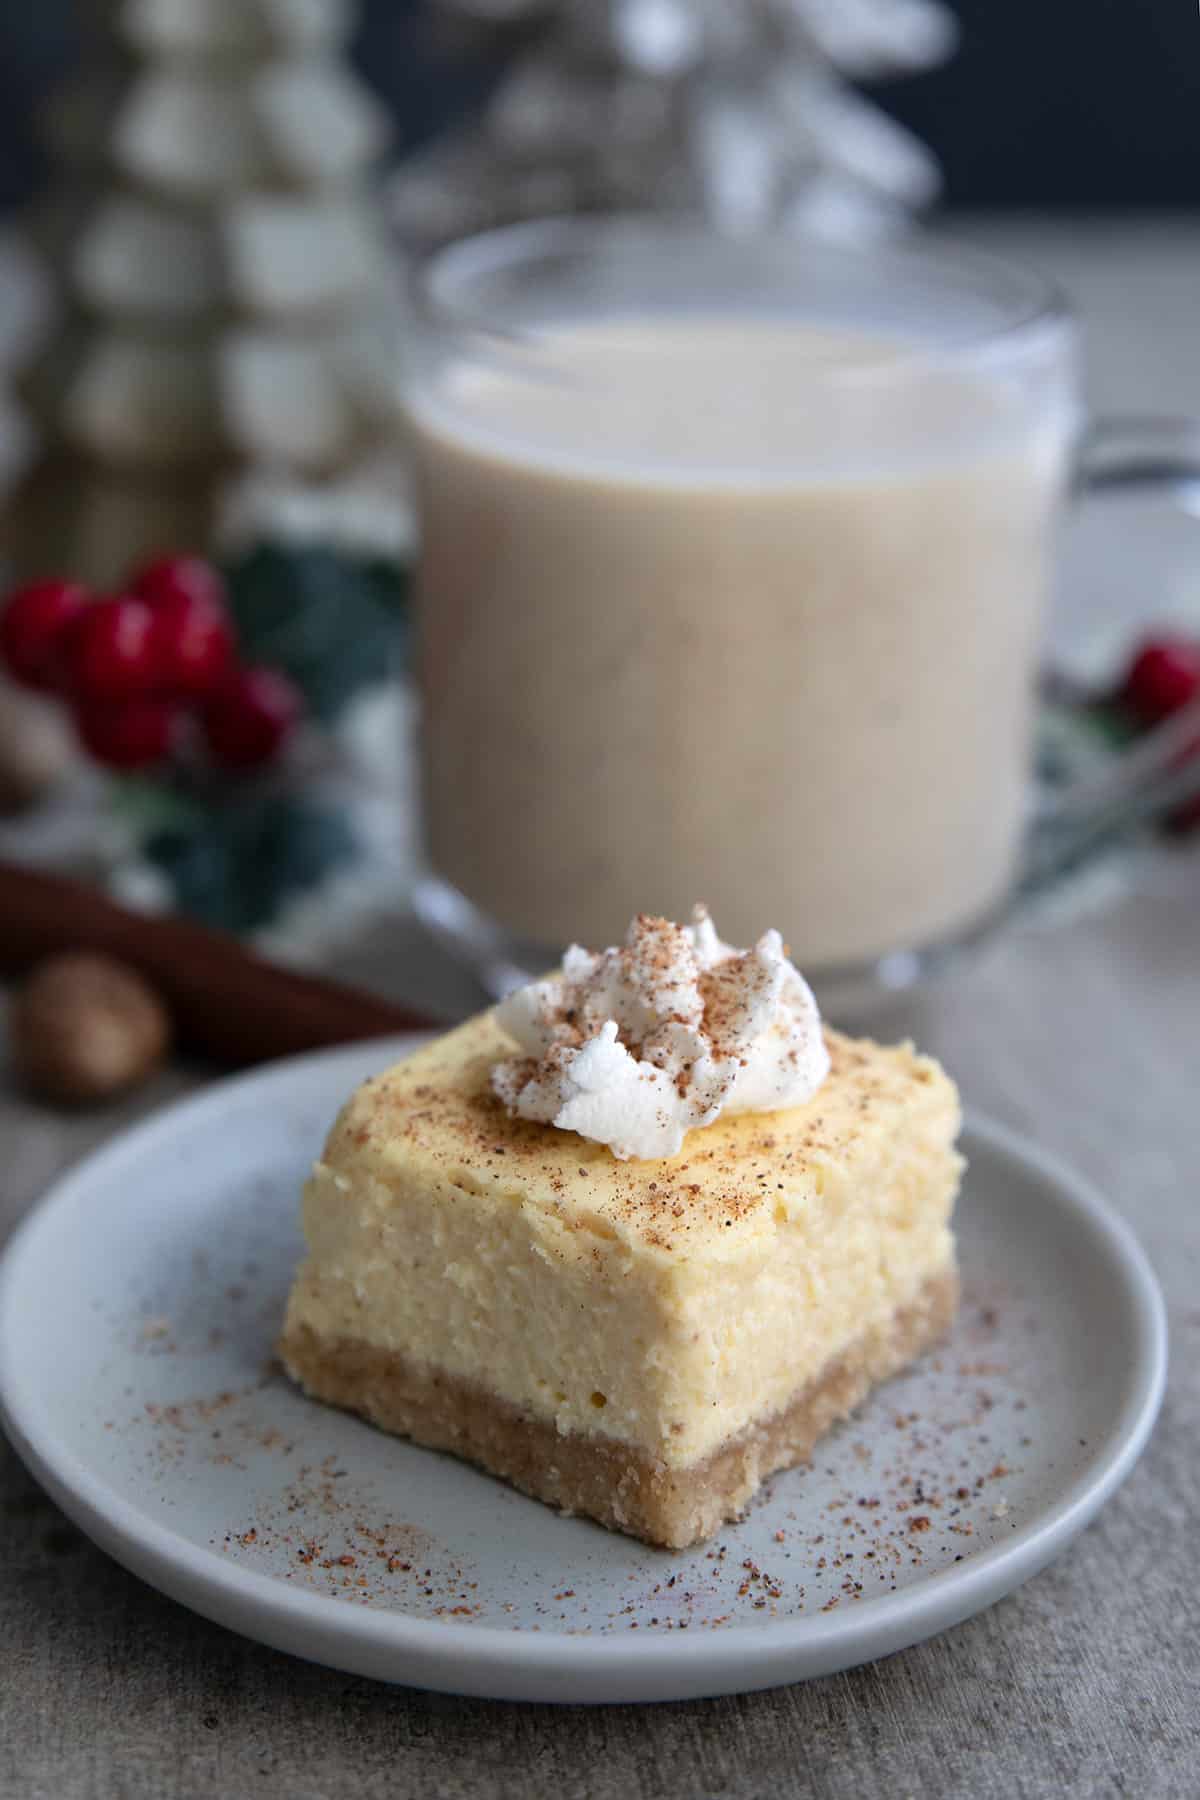 A keto eggnog cheesecake bar sits on a small dessert plate, in front of a cup of eggnog.